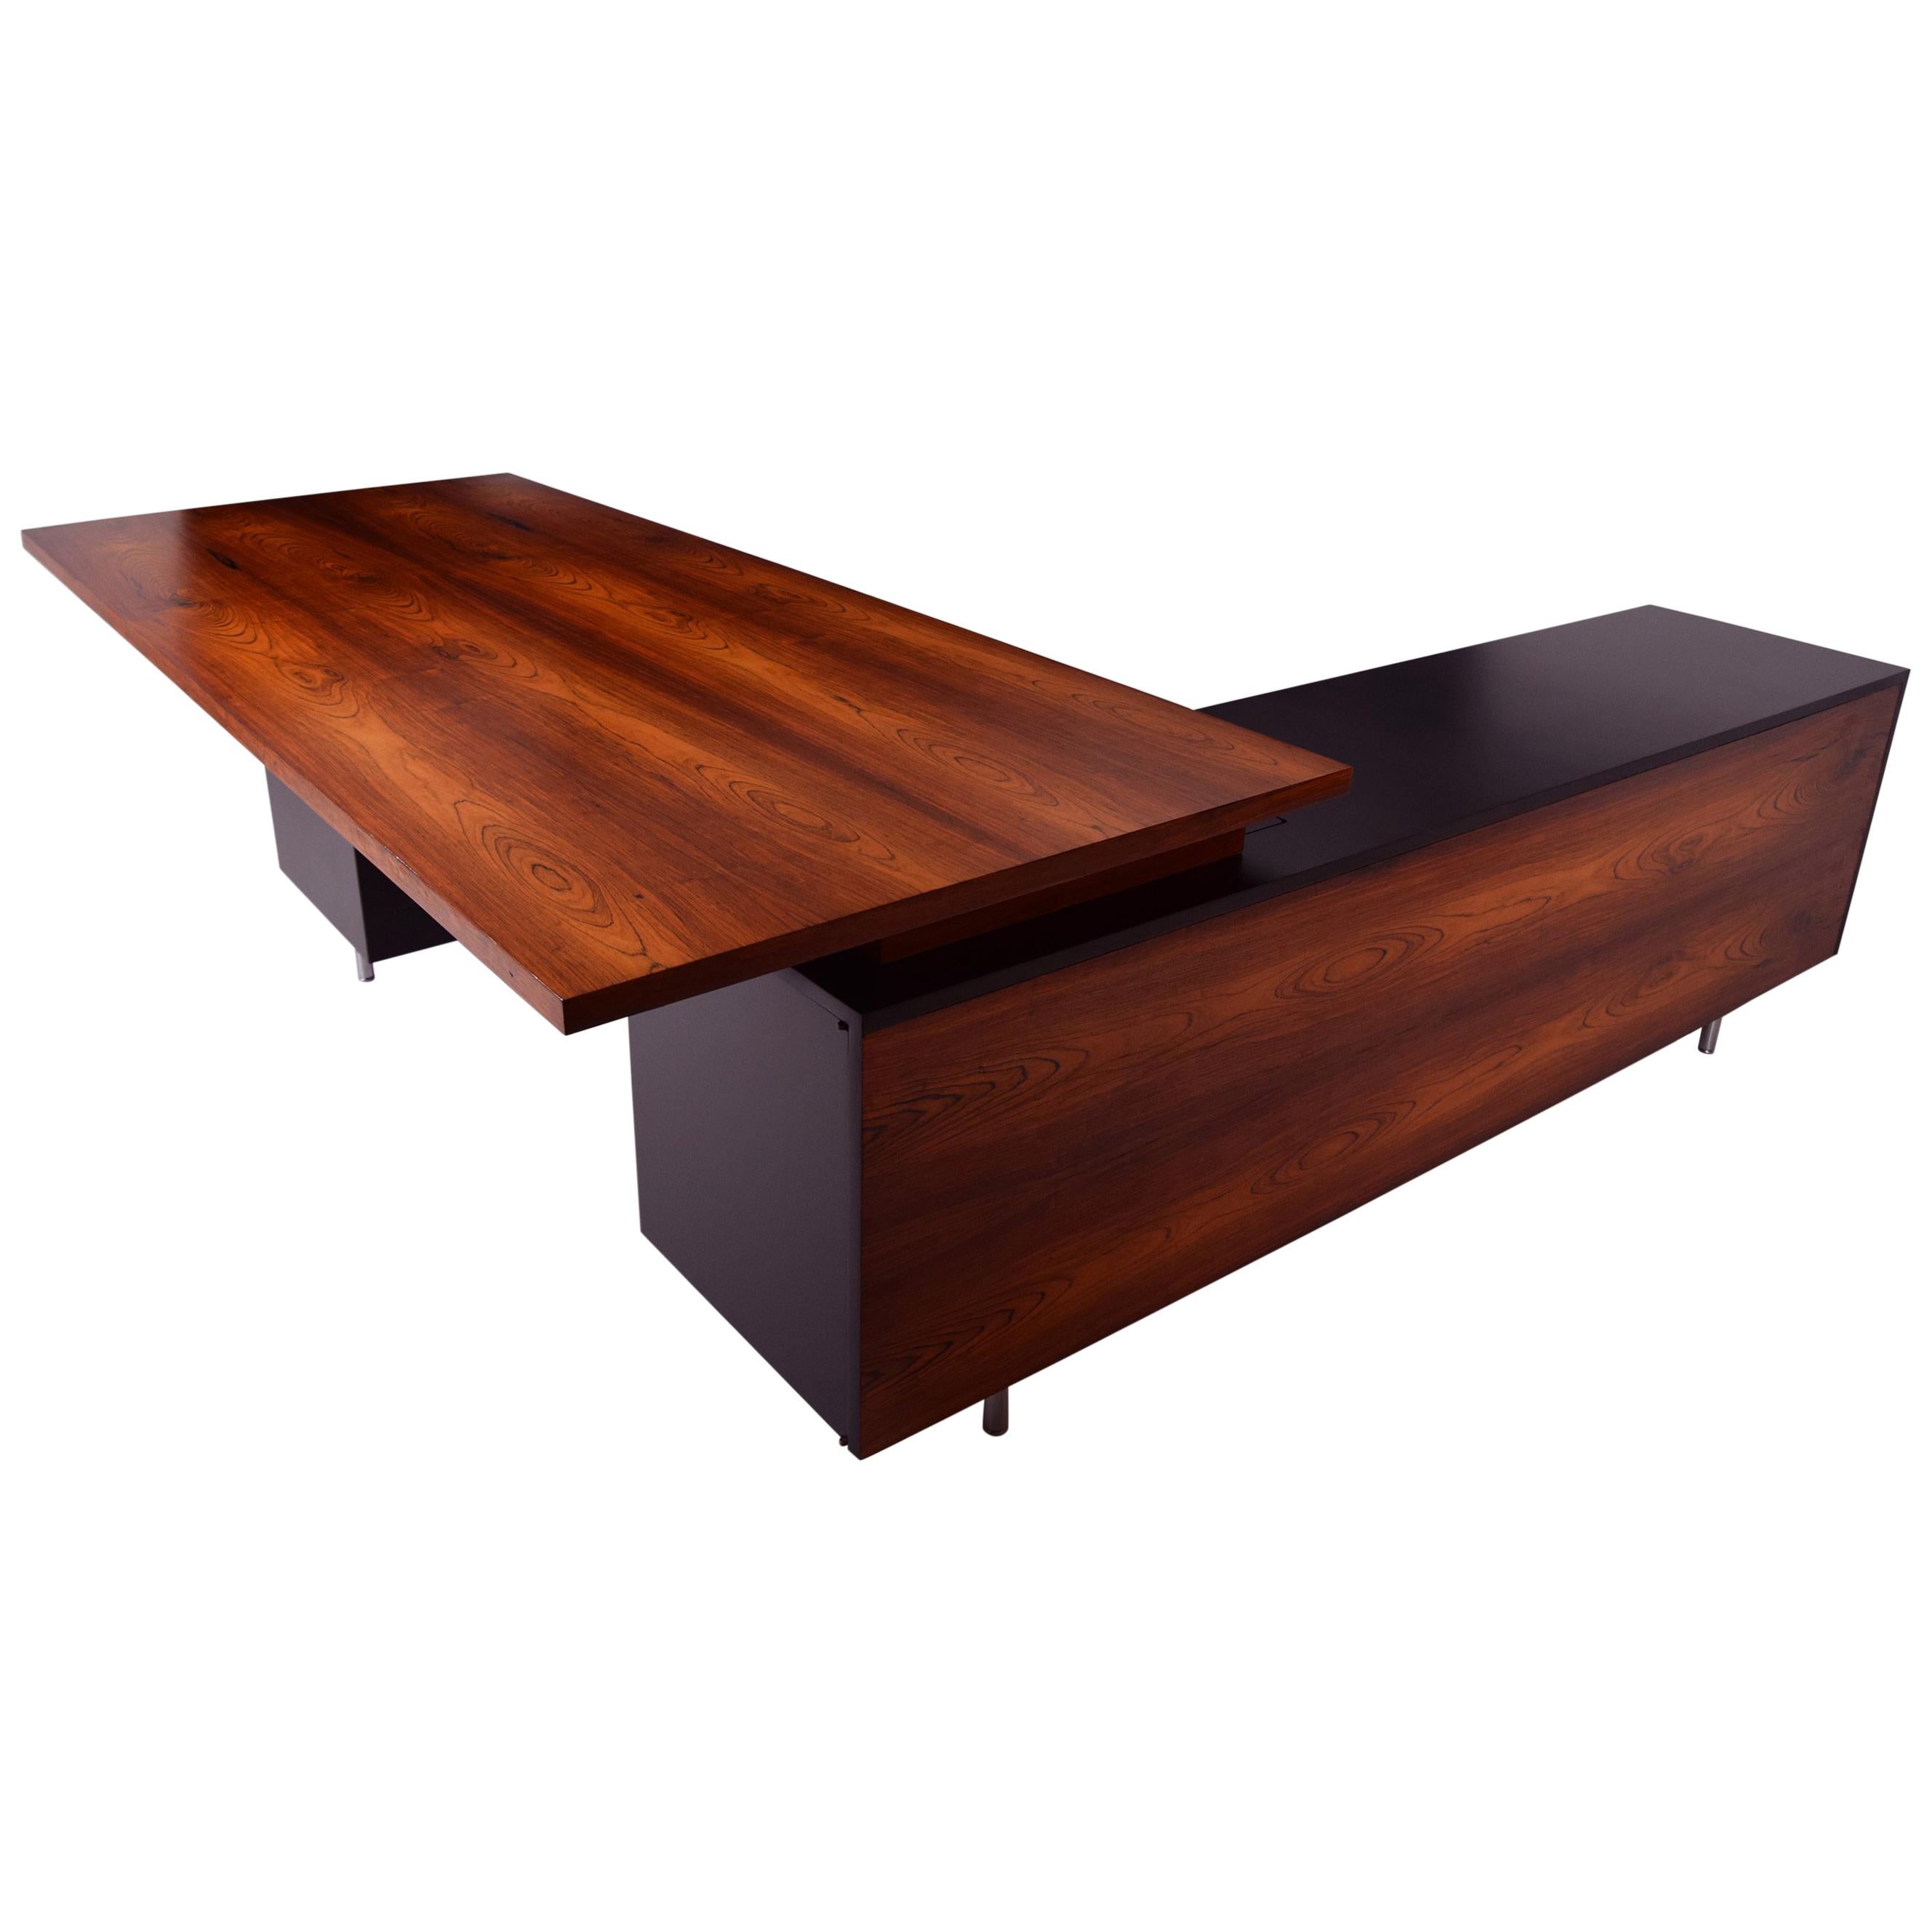 George Nelson, Herman Miller, USA, circa 1952
Model 8436-L EOG (Executive Office Group)
Executive L-shape desk, rosewood, walnut, black lacquer, aluminum, steel.
Measures: 91